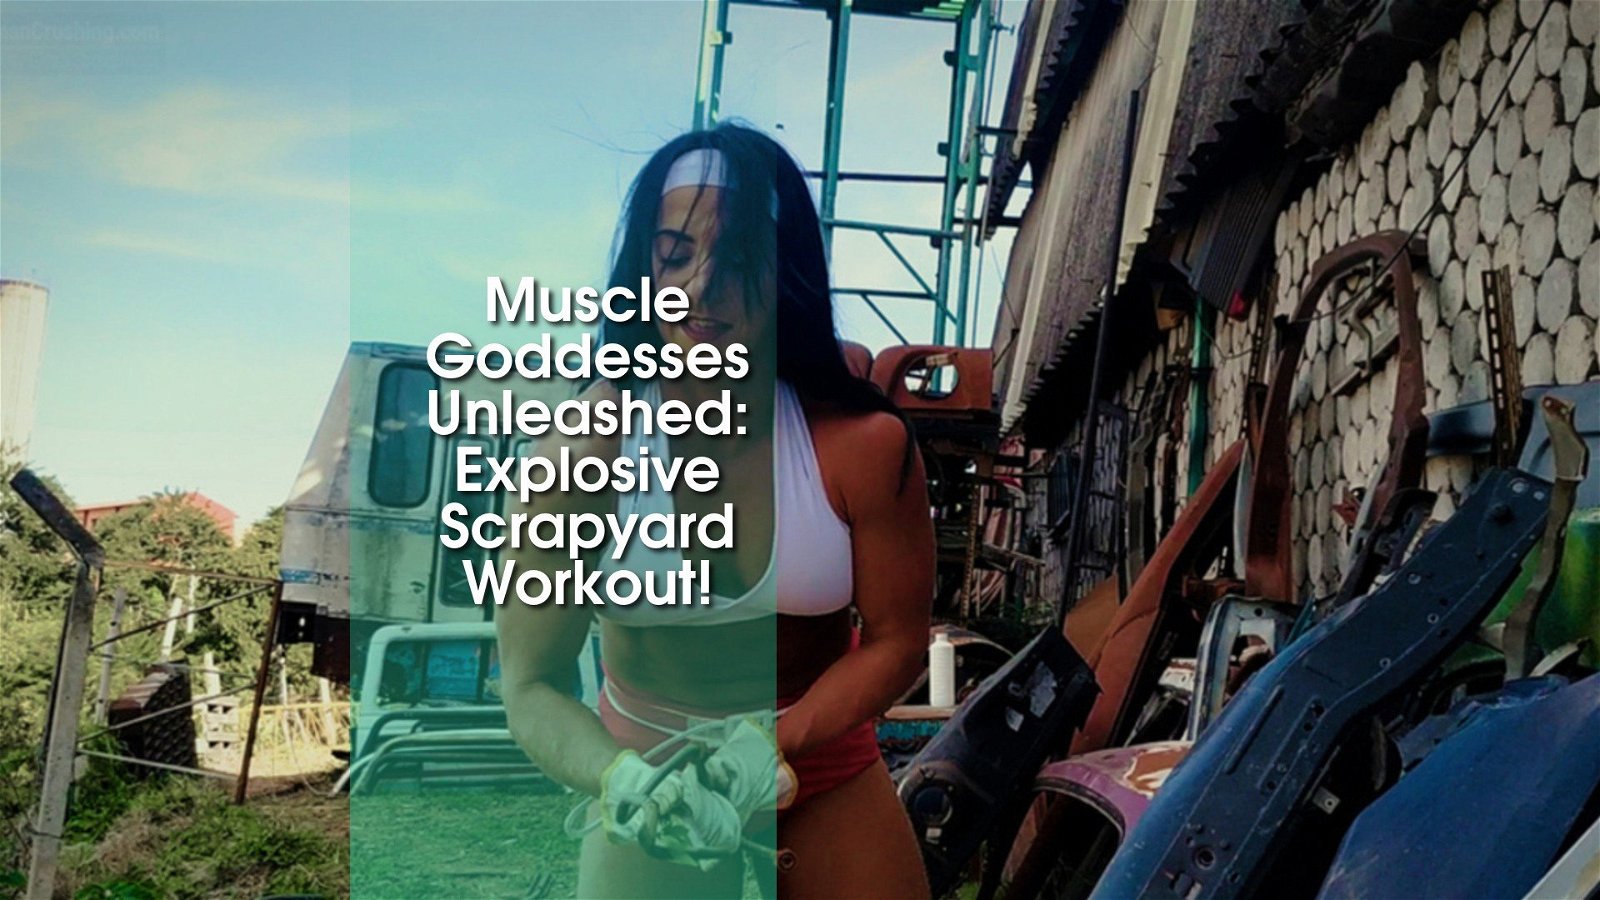 Photo by MusclegirlStrength with the username @MusclegirlStrength, who is a brand user,  January 8, 2024 at 3:31 PM and the text says 'Muscle Goddesses Unleashed: Explosive Scrapyard Workout!
https://bit.ly/3GgcvzU

#MuscularFemales #StrongWomen #FemaleBodybuilders #MuscleGirls #FlexingMuscles #FeatsOfStrength #LiftingCars #BendingMetal #CrushingThings #PowerfulWomen #SensualMuscles..'